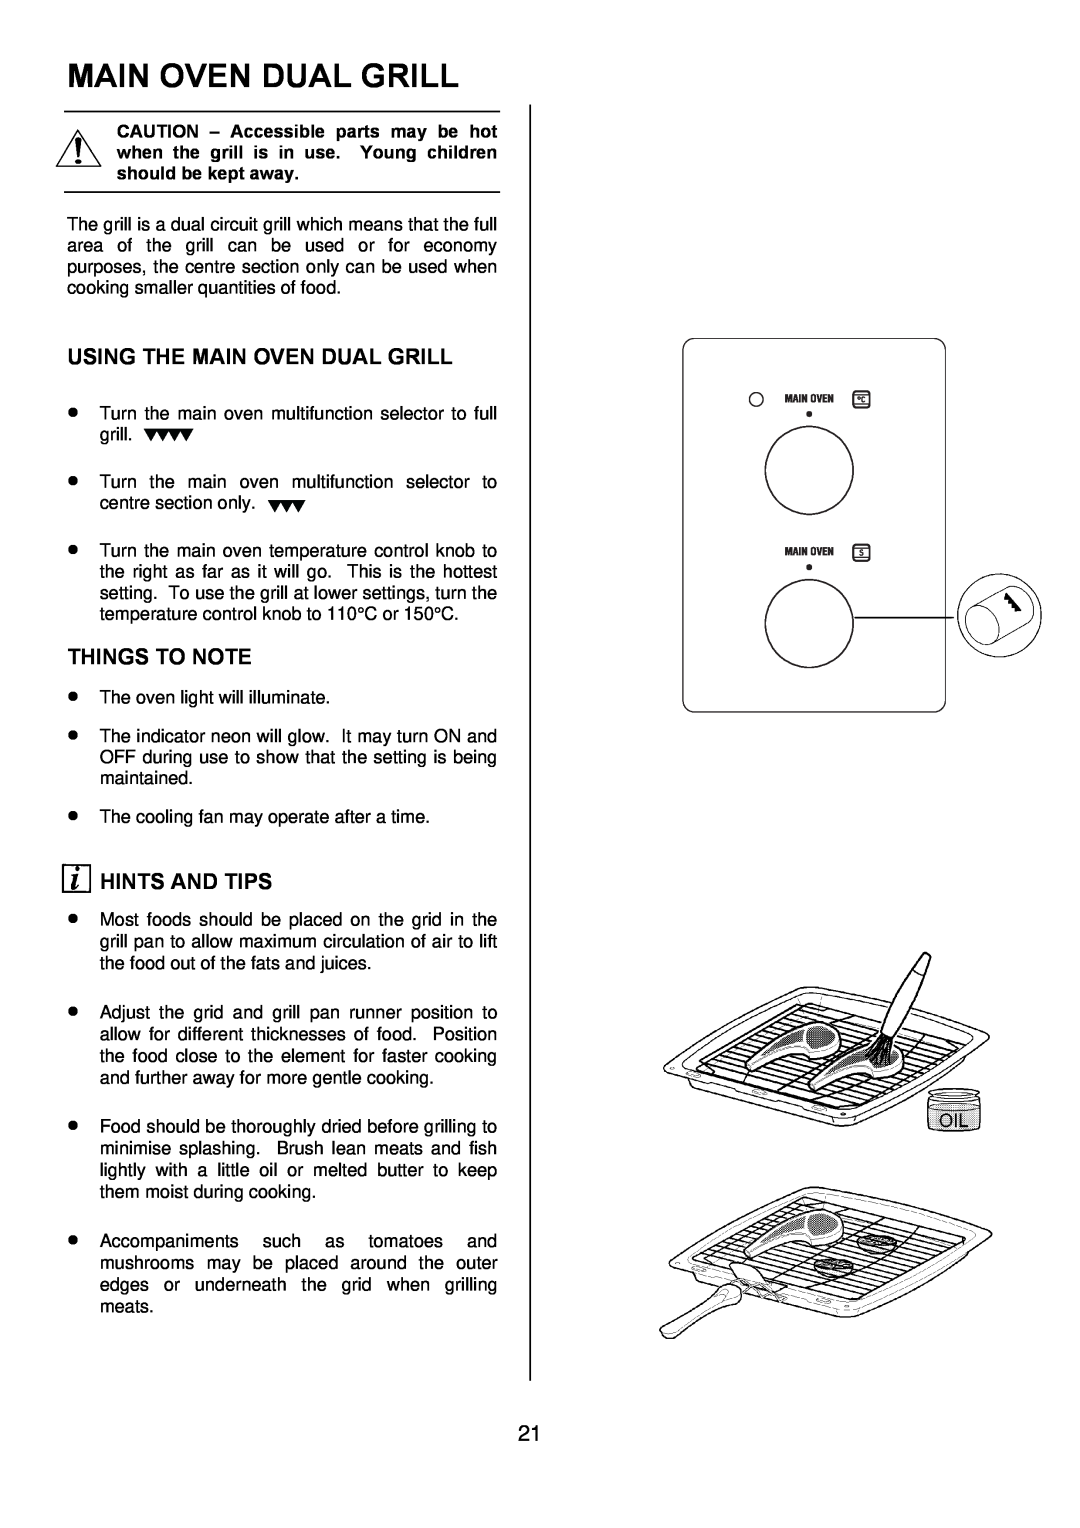 Zanussi ZUQ 875 manual Using The Main Oven Dual Grill, Things To Note, Hints And Tips 